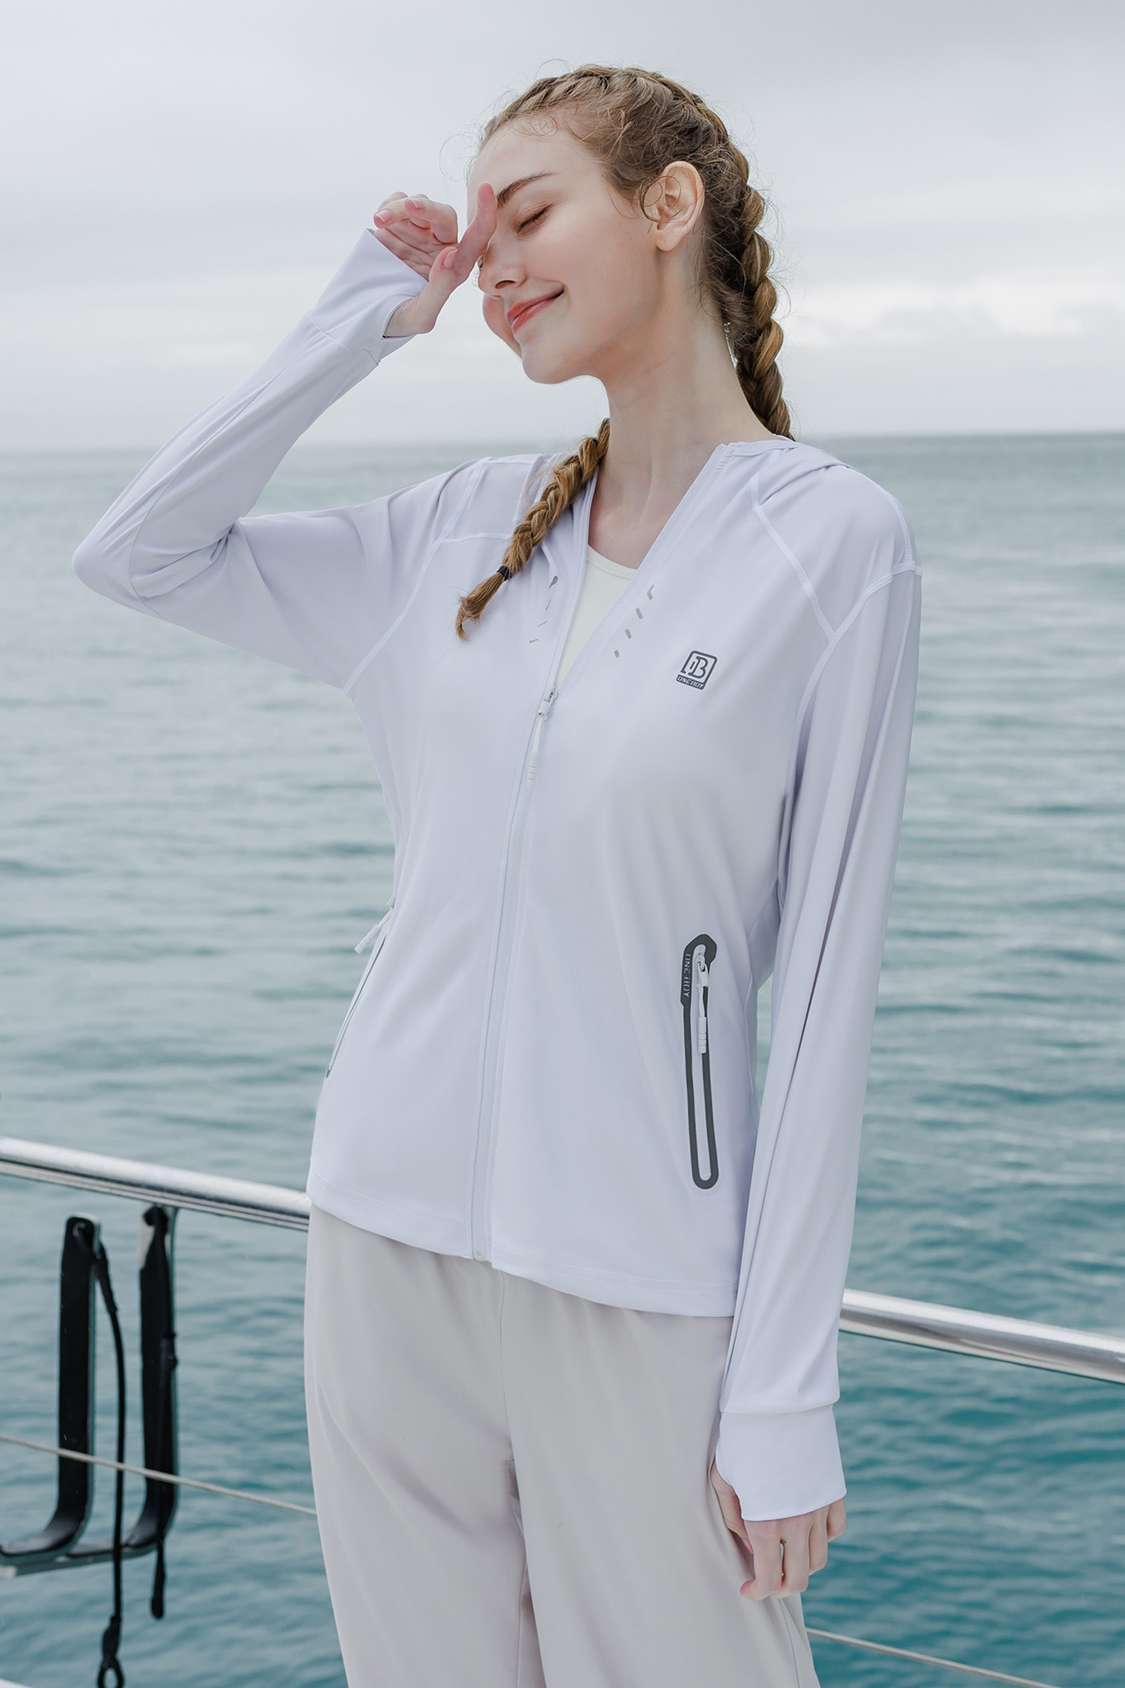 Ice-Tech UPF50+ Sun-Protective Breathable Jacket For Women